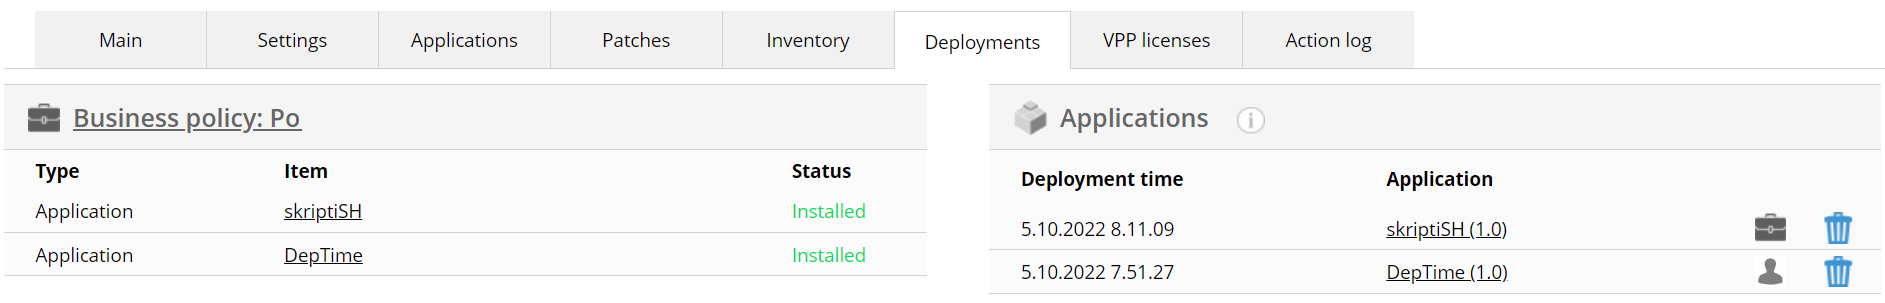 Deployments on a device